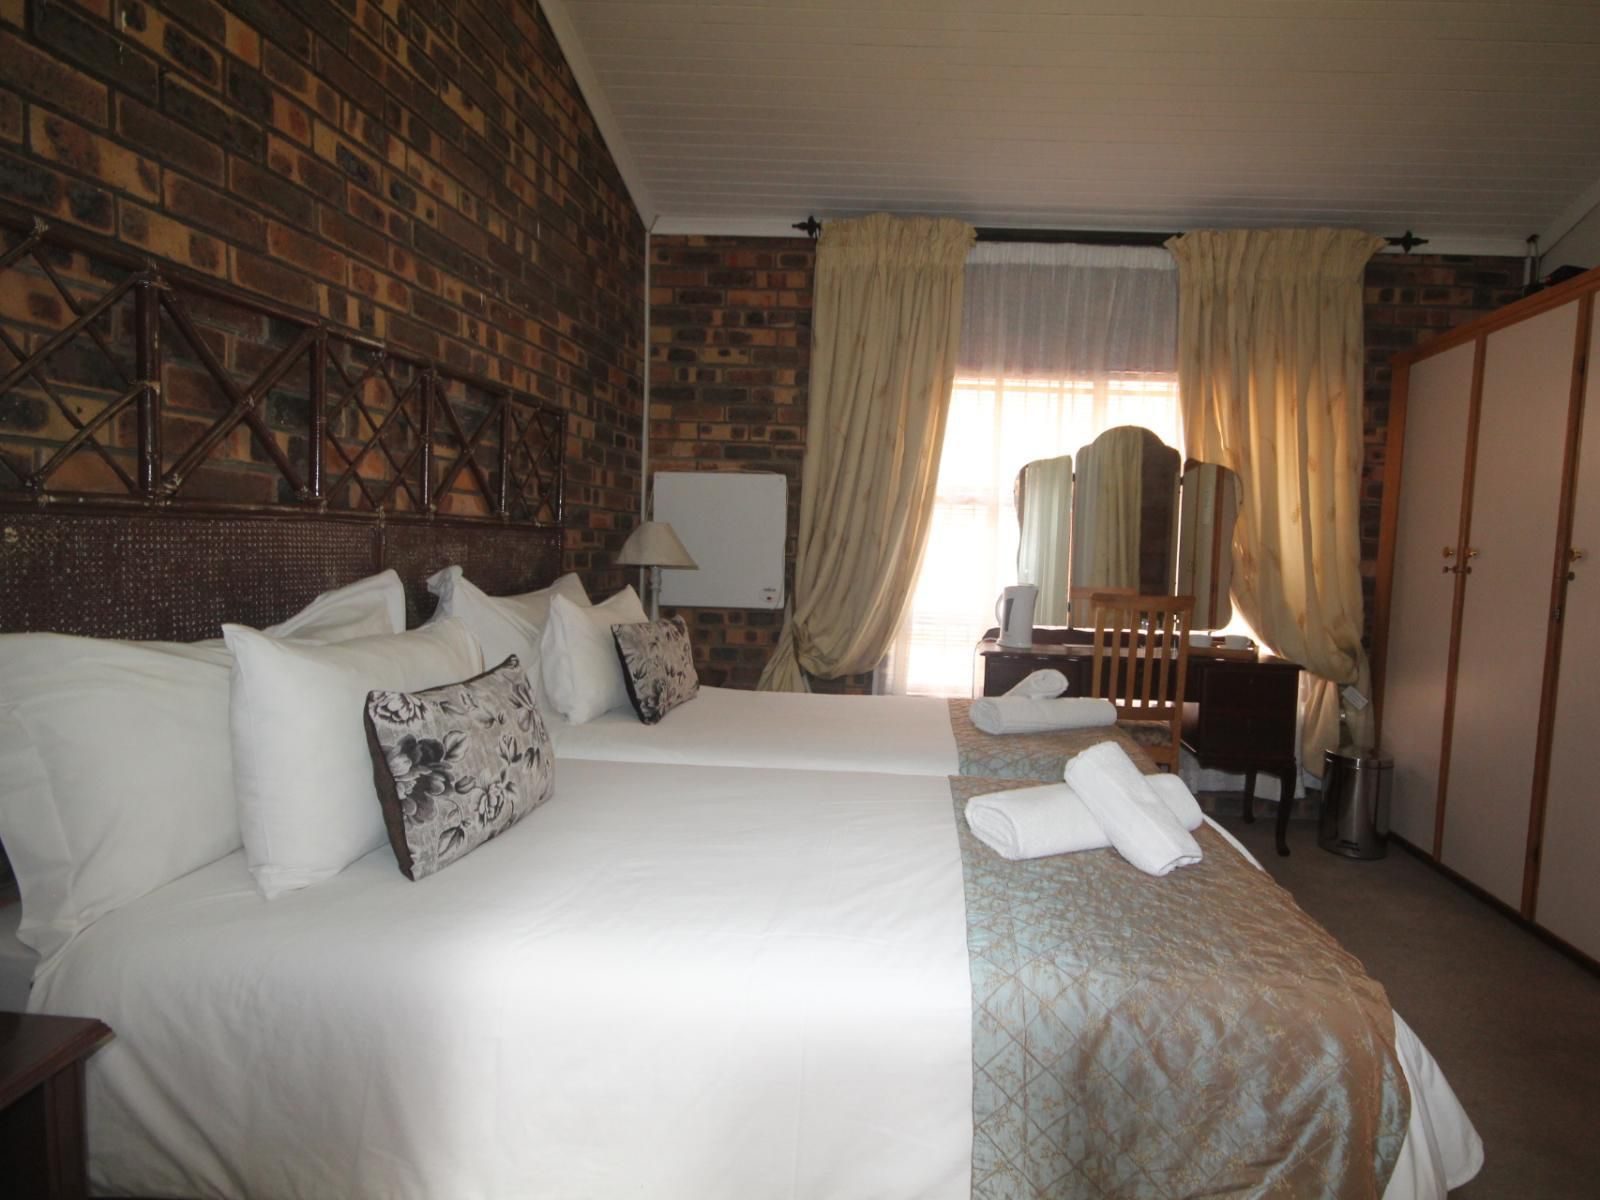 The Guesthouse Secunda Mpumalanga South Africa Bedroom